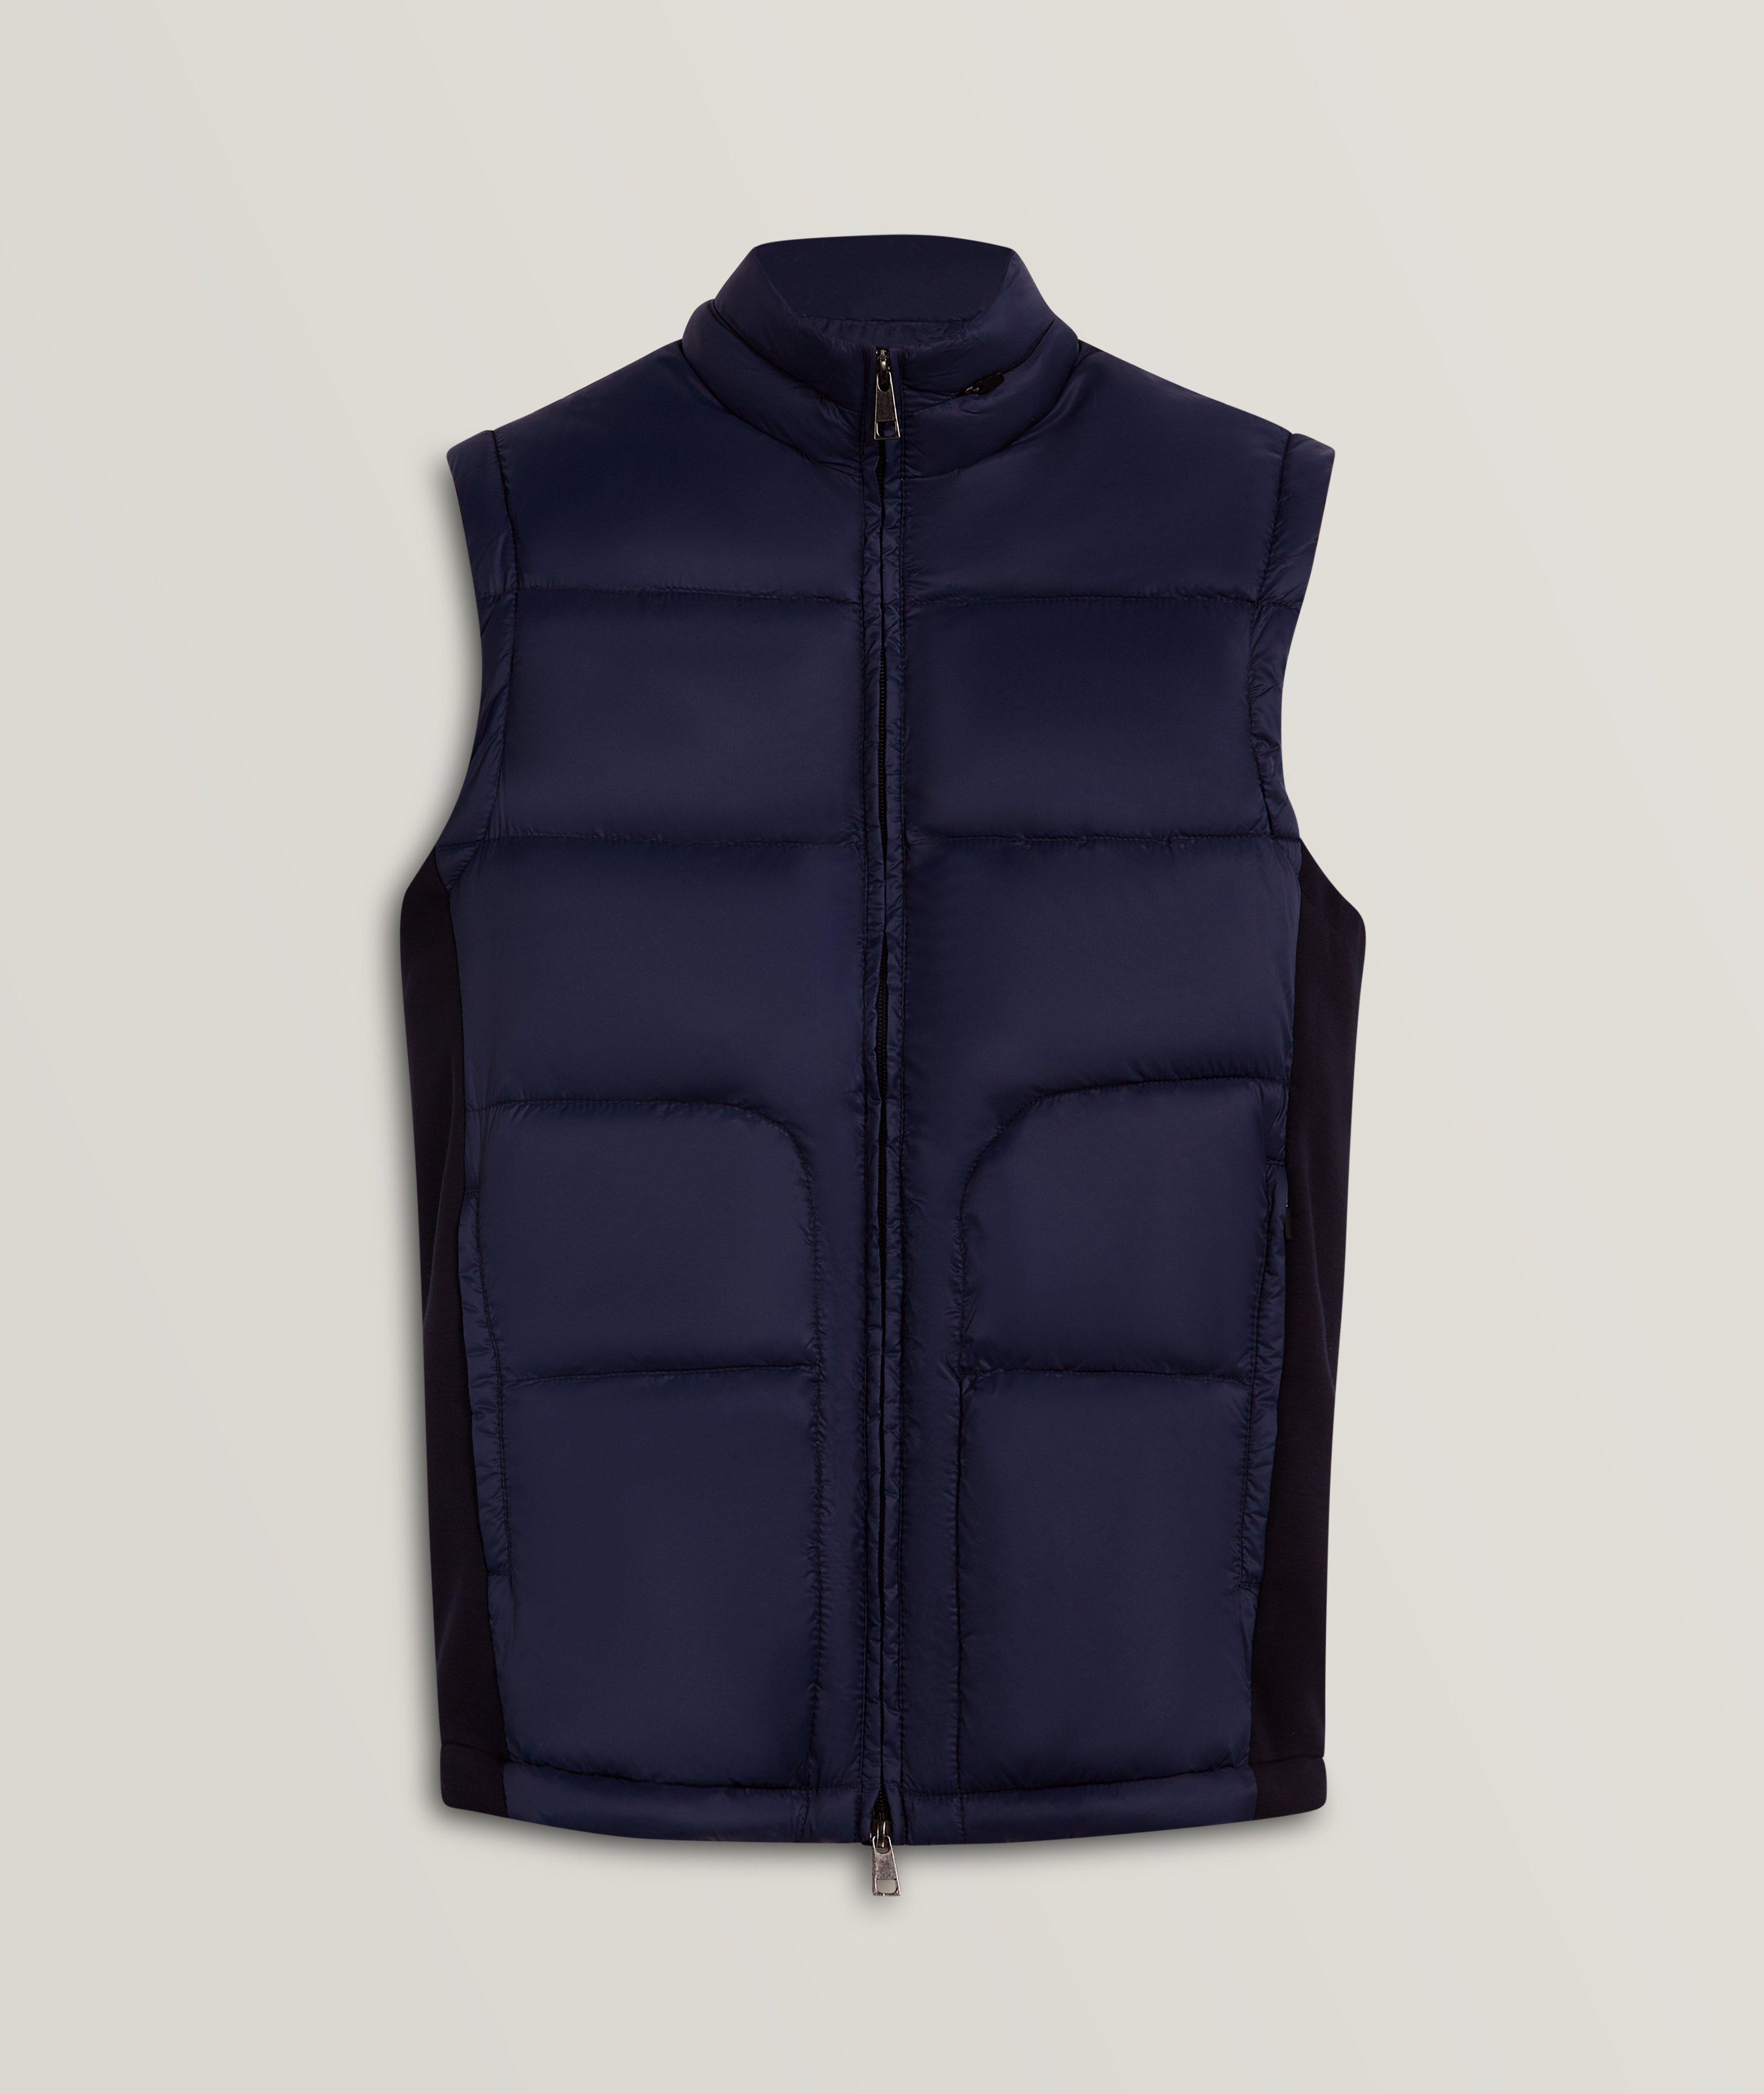 Quilted Mixed Material Nylon Vest image 0